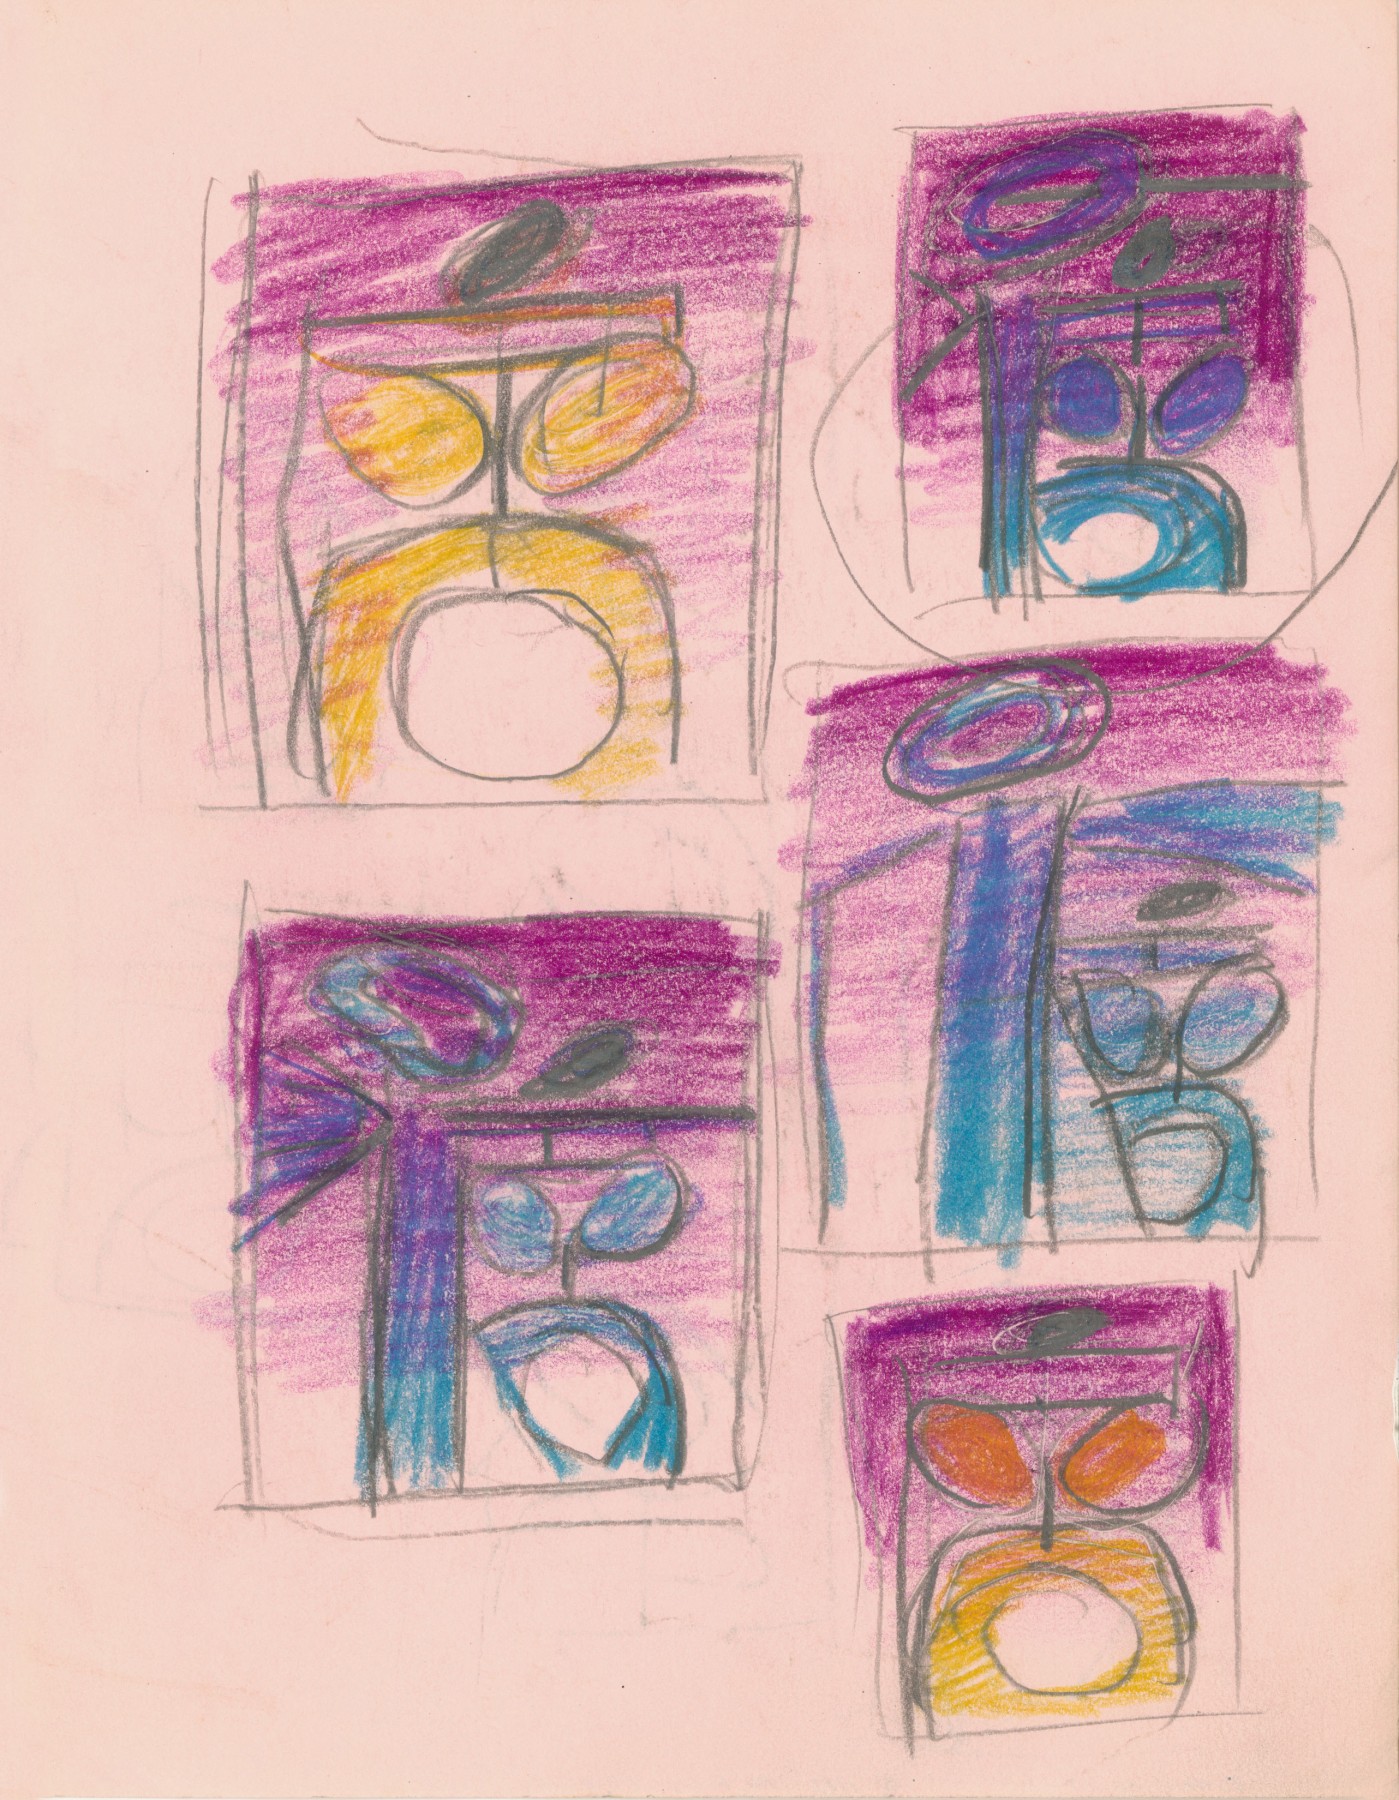 Untitled, C 30, c.1970s
Graphite and Crayon
H: 11 x W: 8.5 inches

&amp;nbsp;